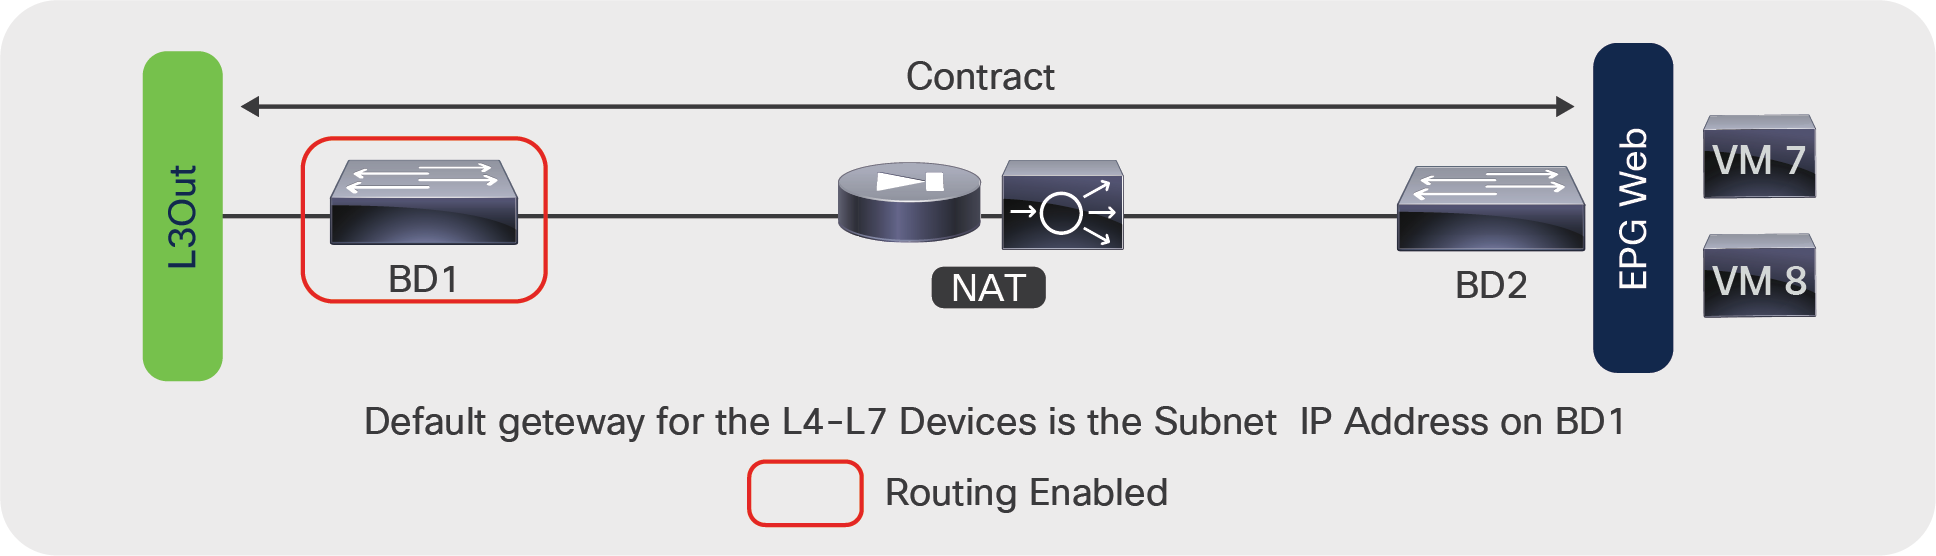 Topology of a load balancer deployed in routed mode with L3Out